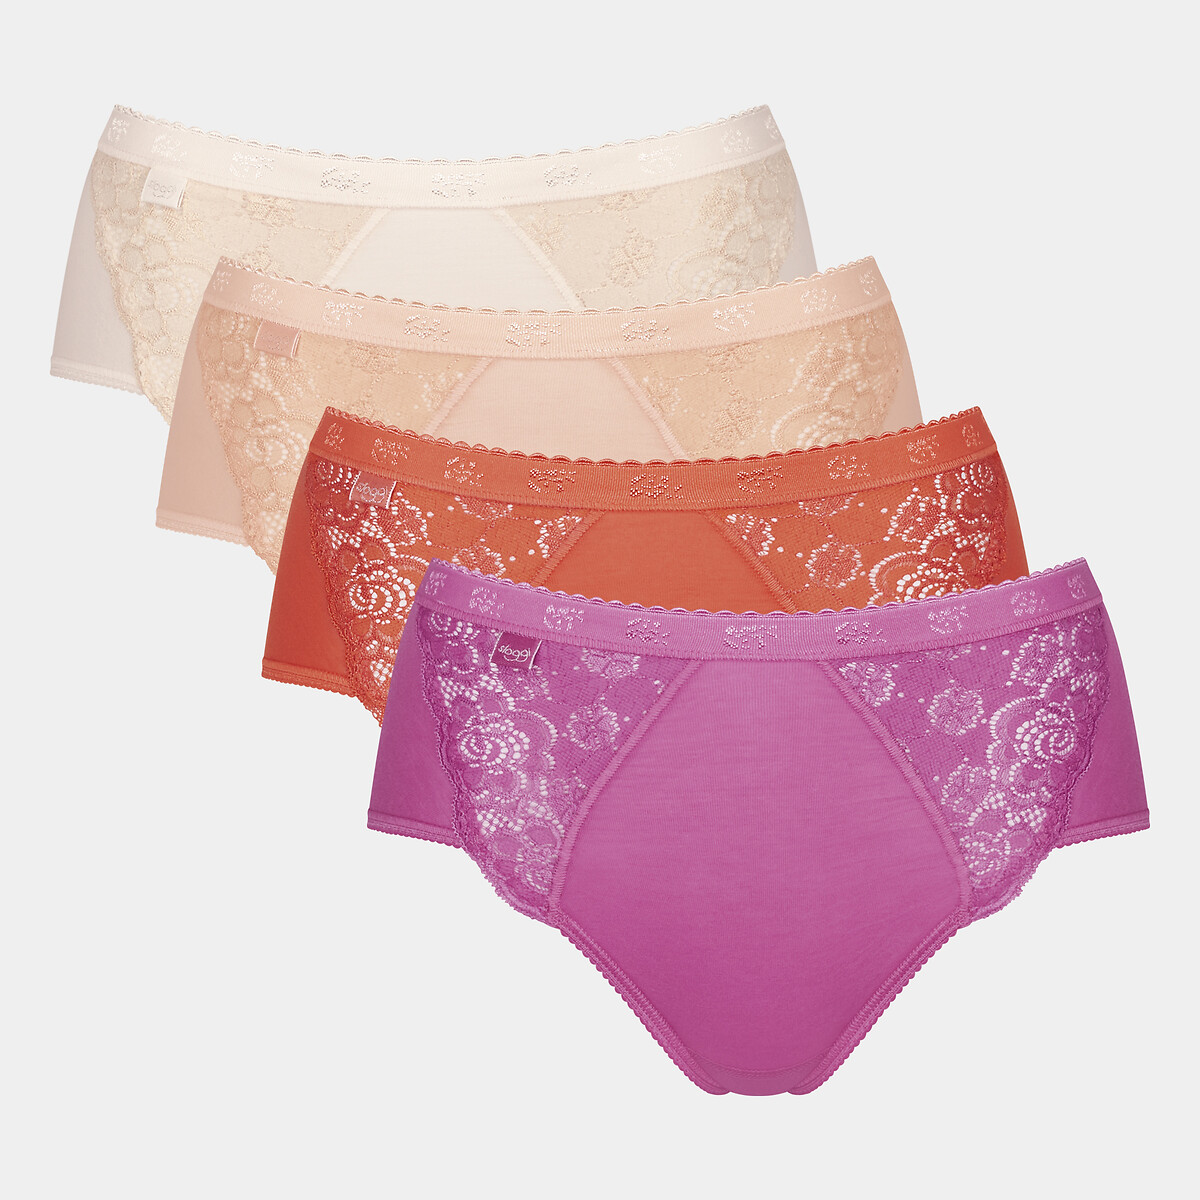 Pack of 4 Chic Midi Knickers in Cotton Mix